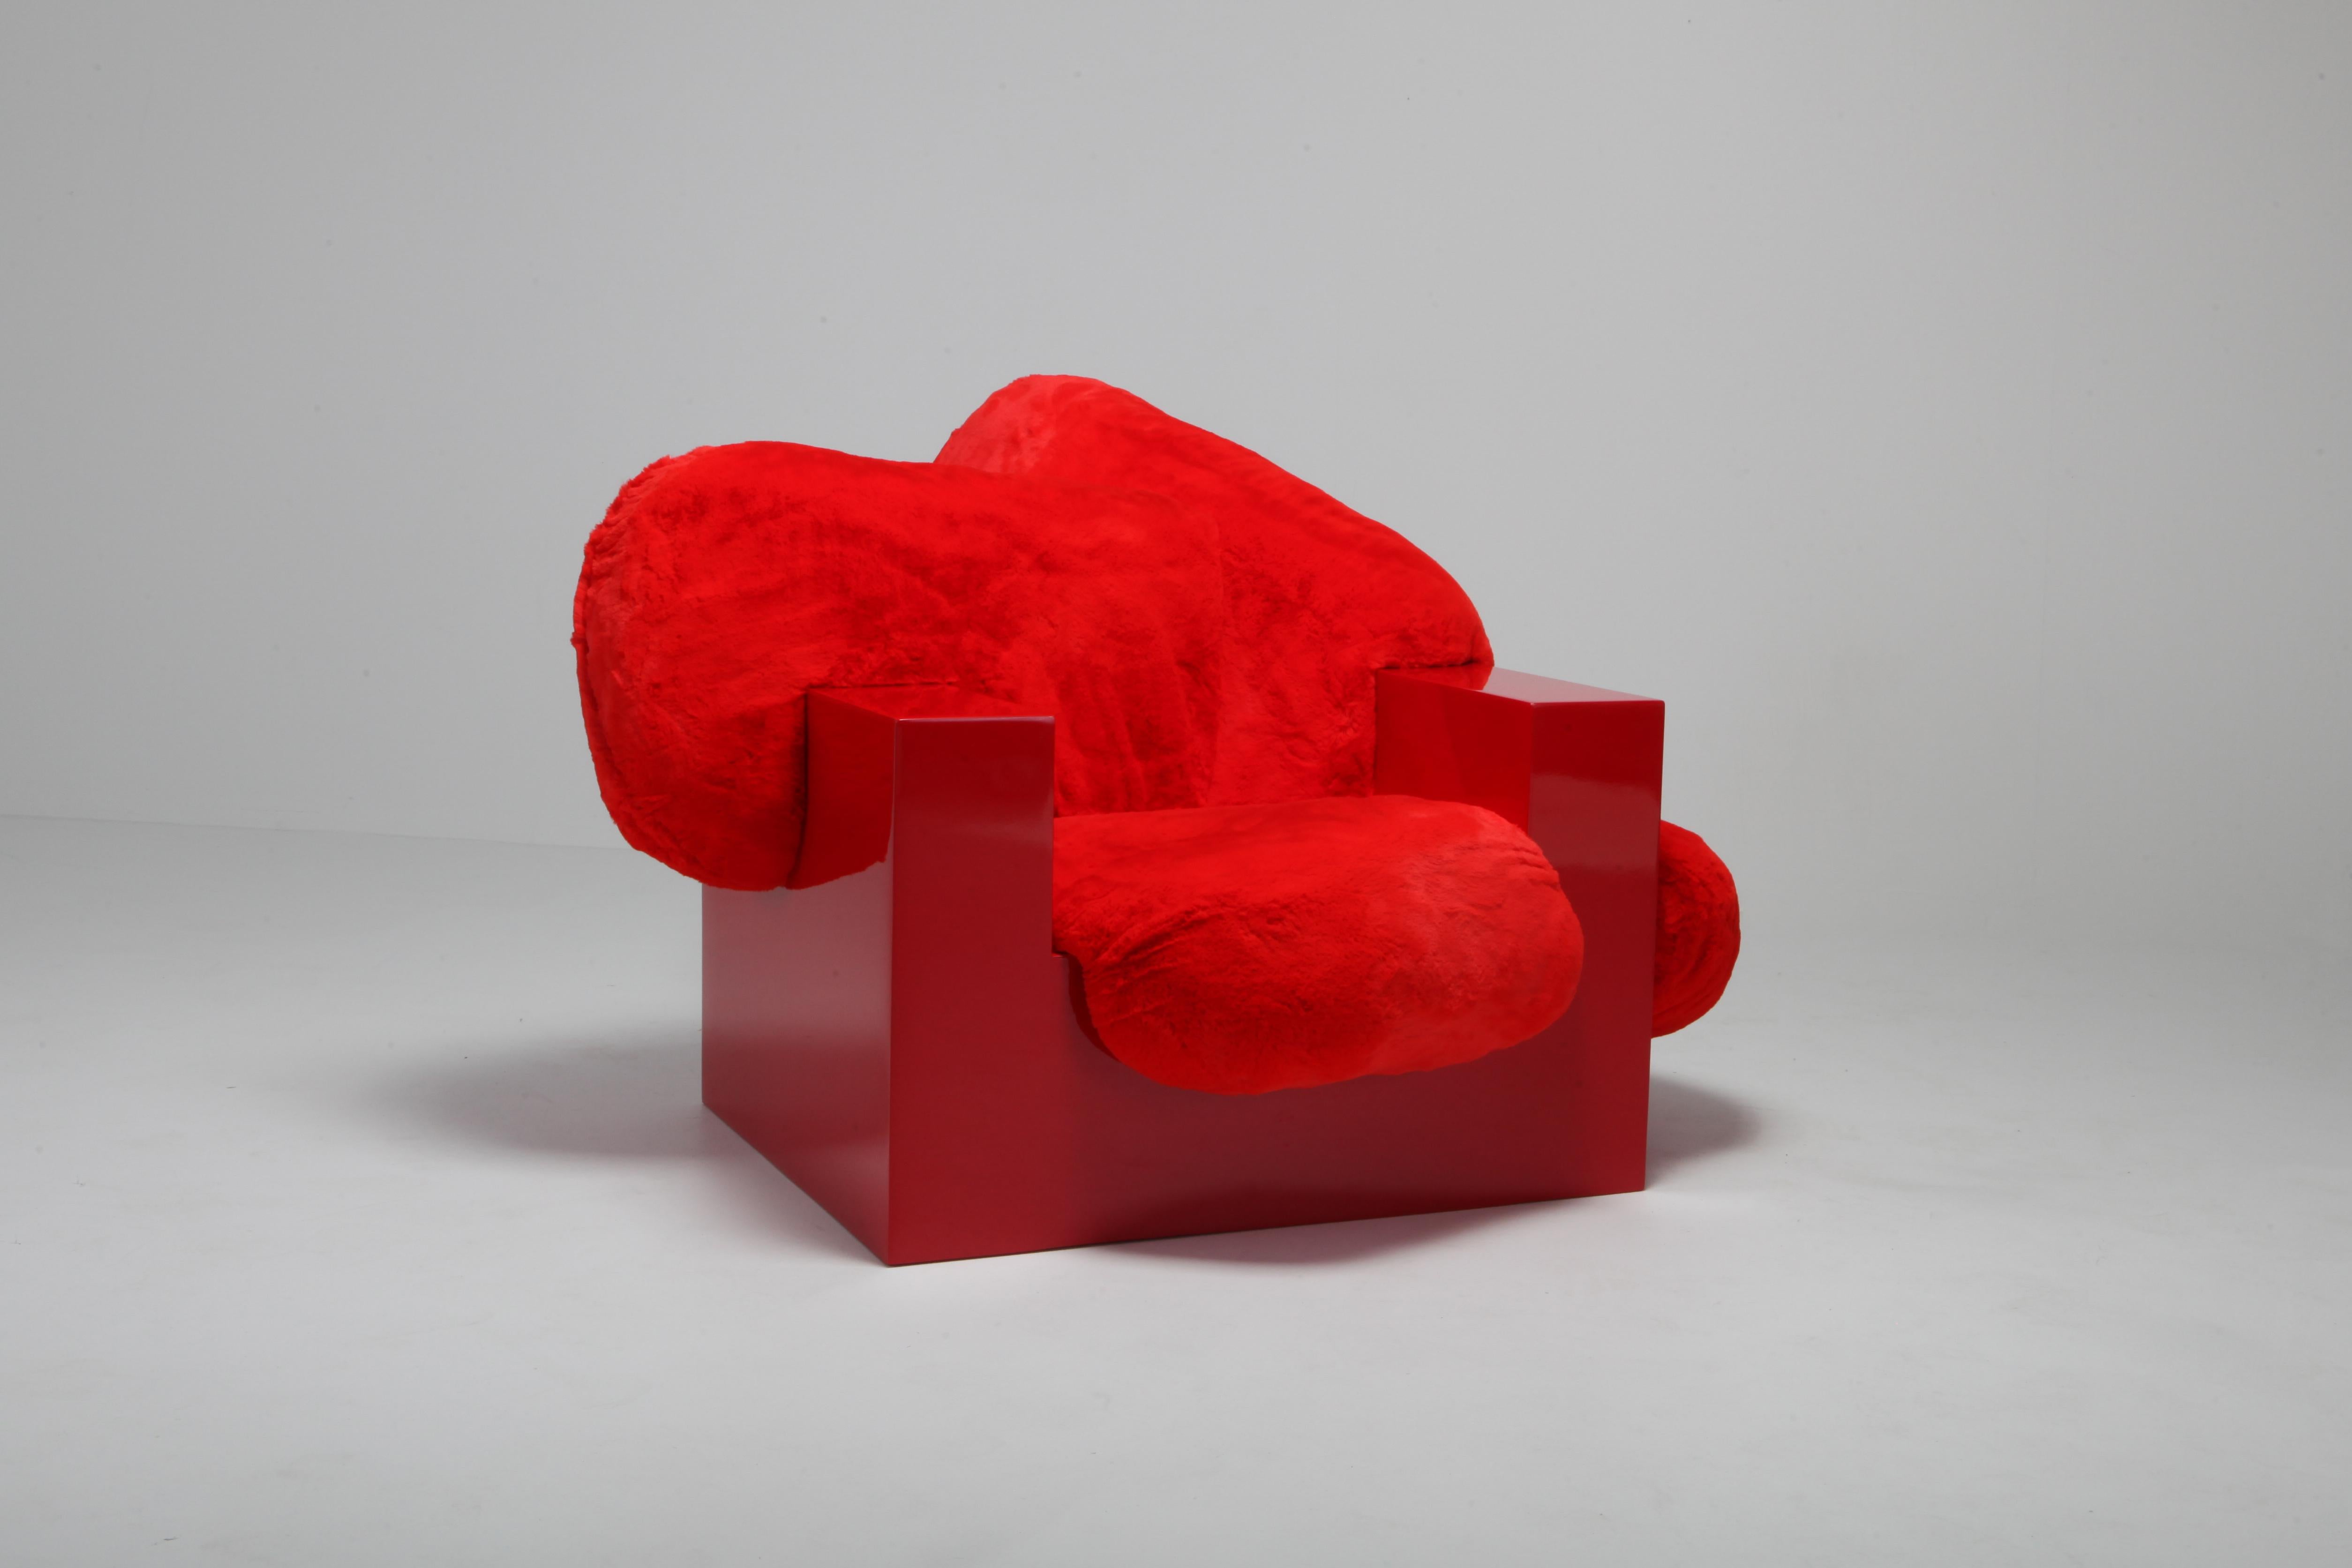 Pillow lounge chair (prototype)
Sizes: width 129 cm, depth 118 cm, height 87 cm material: wood, PU-foam, faux fur, car paint edition: prototype, unique piece.

Schimmel & Schweikle have announced their first solo exhibition 'A tree full of